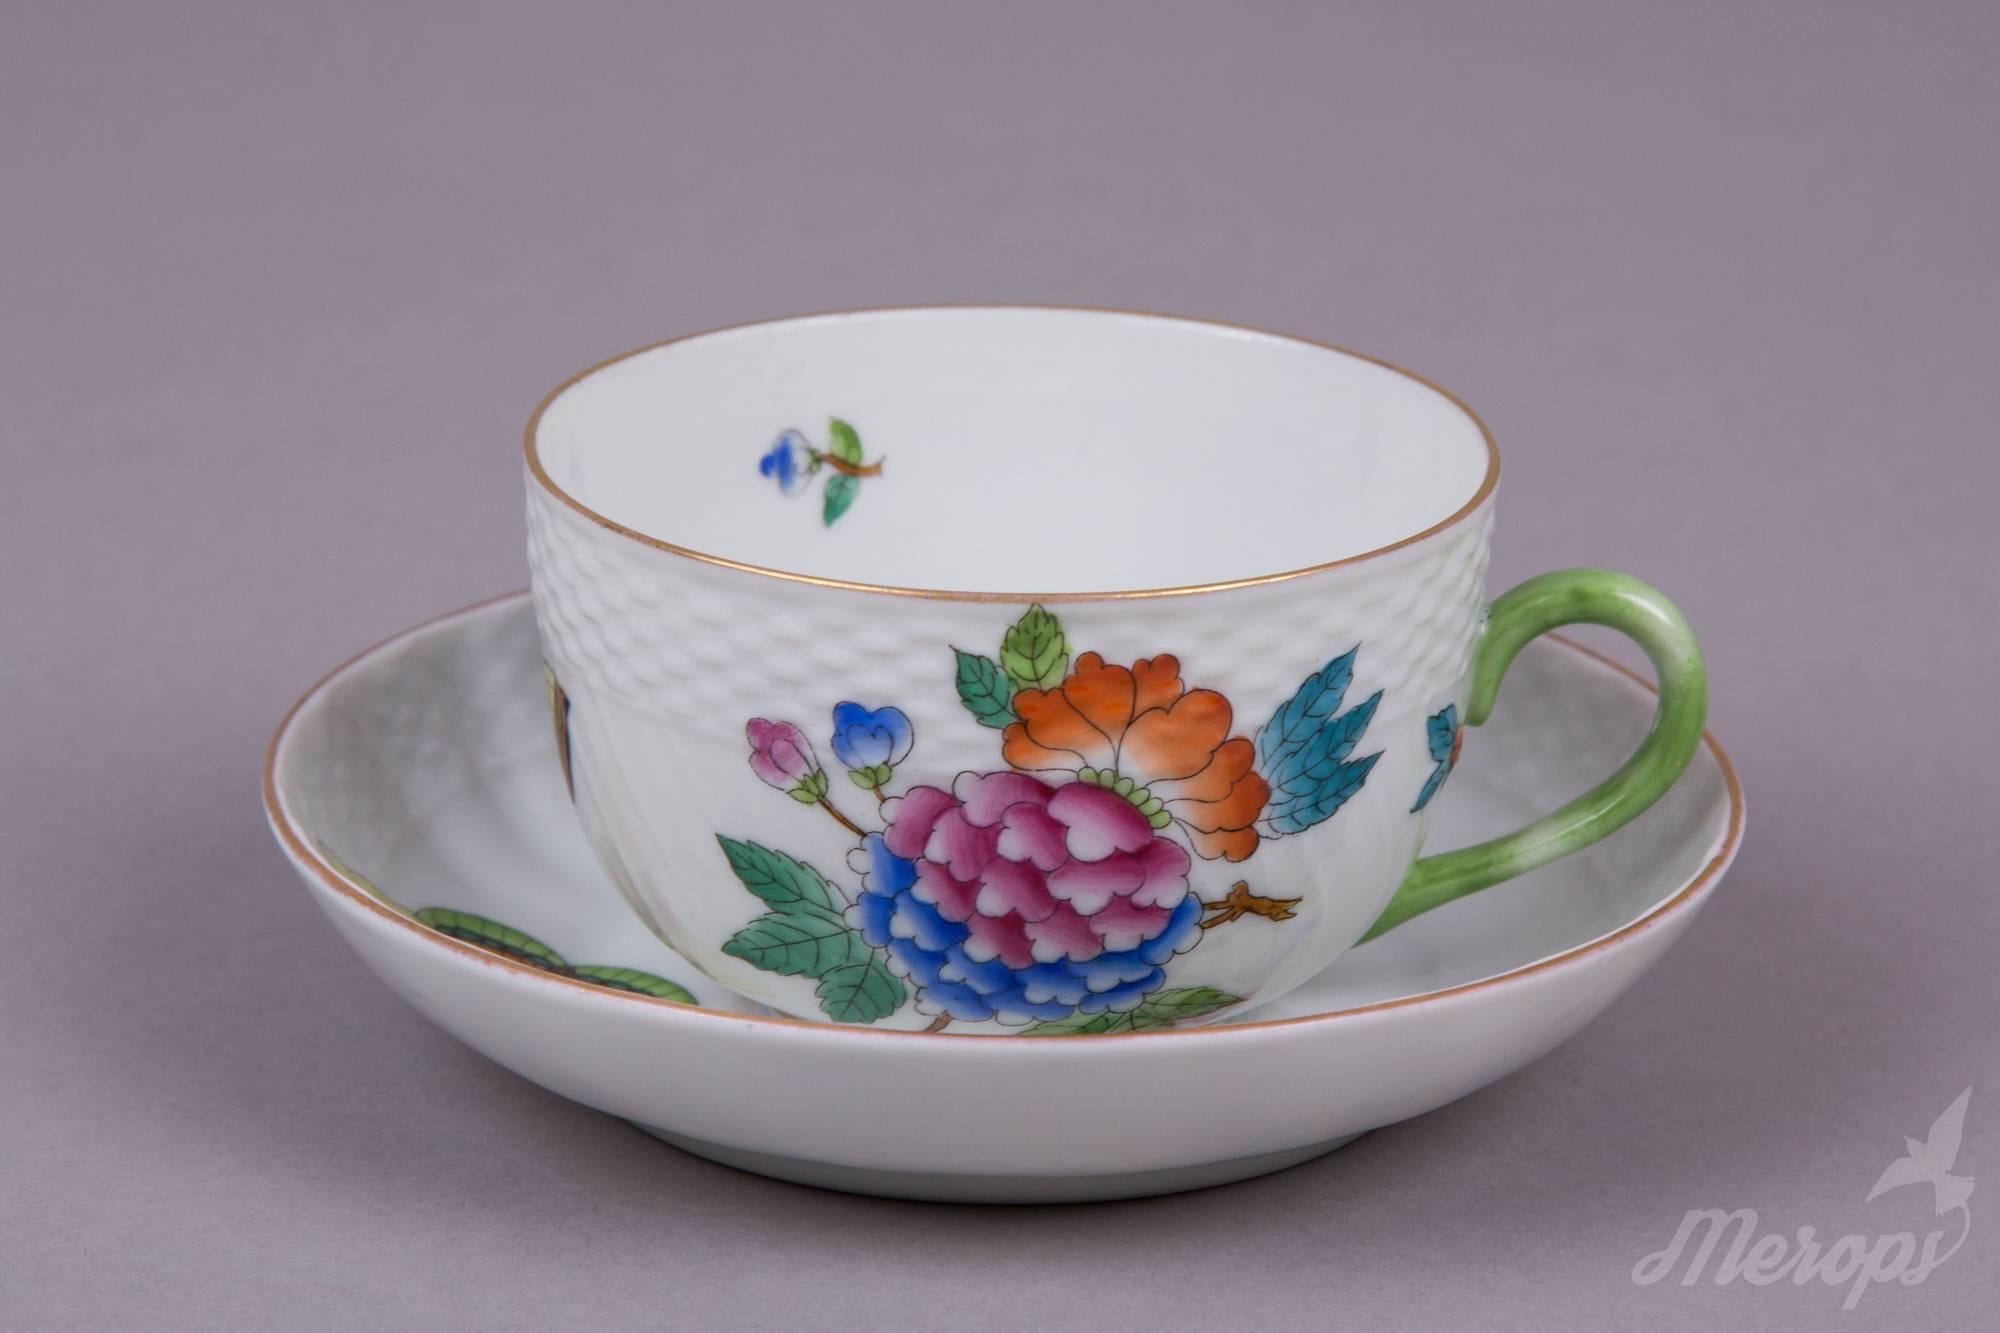 Hand-Painted Herend Queen Victoria Tea and Dessert Set for Ten Persons, from 1942